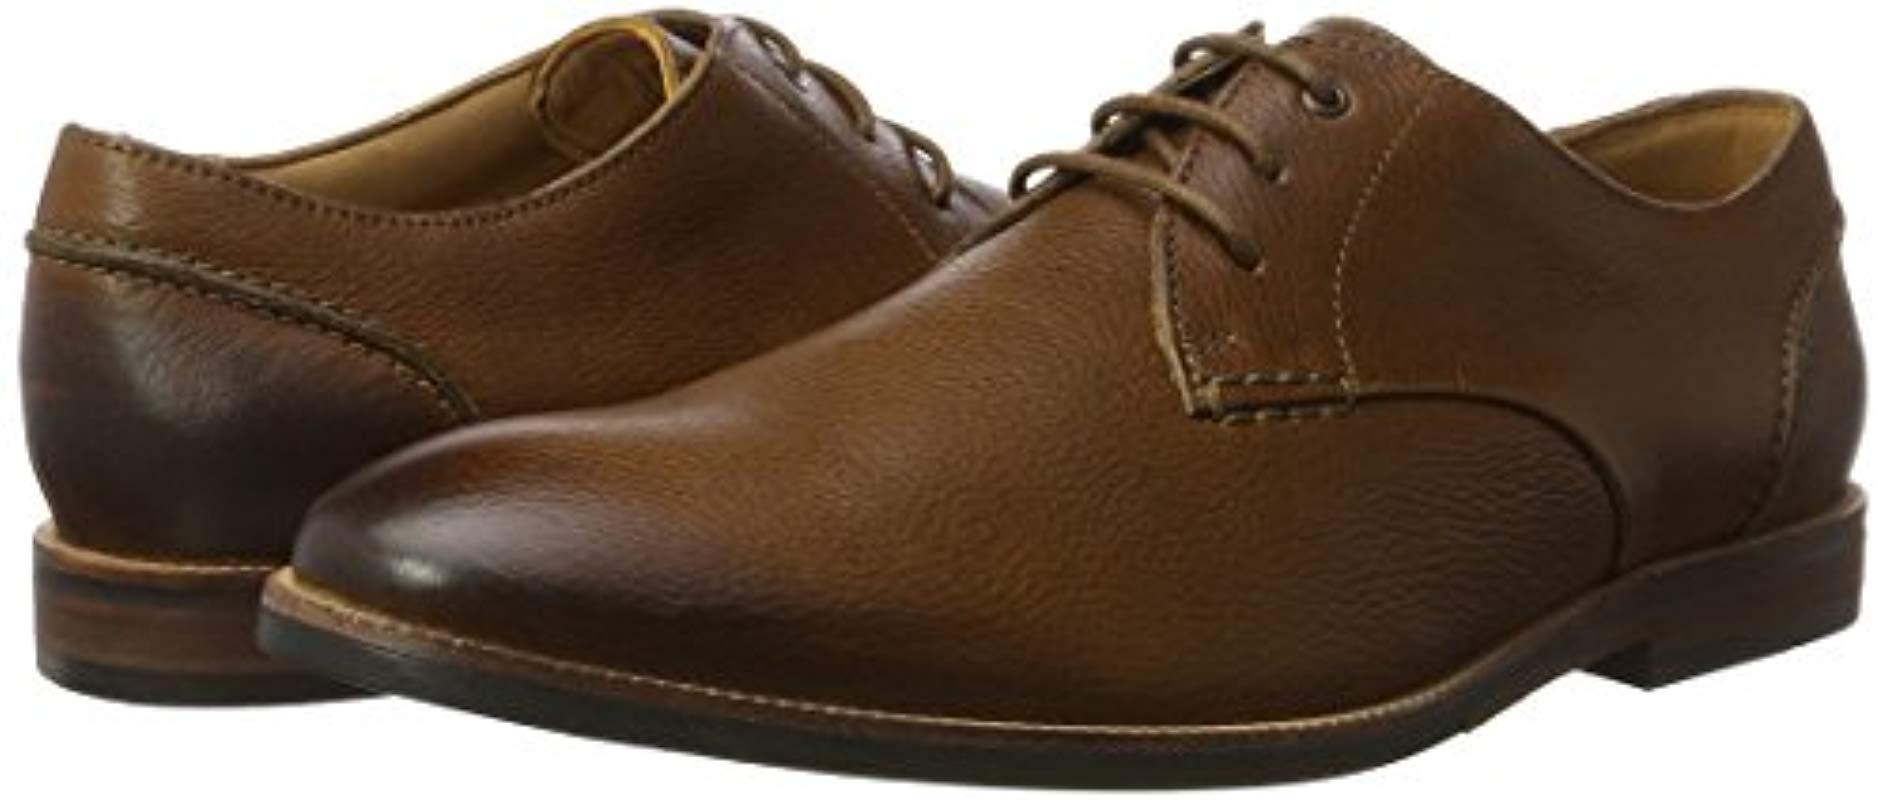 SALE MENS CLARKS LEATHER LACE UP CASUAL FORMAL OFFICE WORK SHOES KEELER WALK